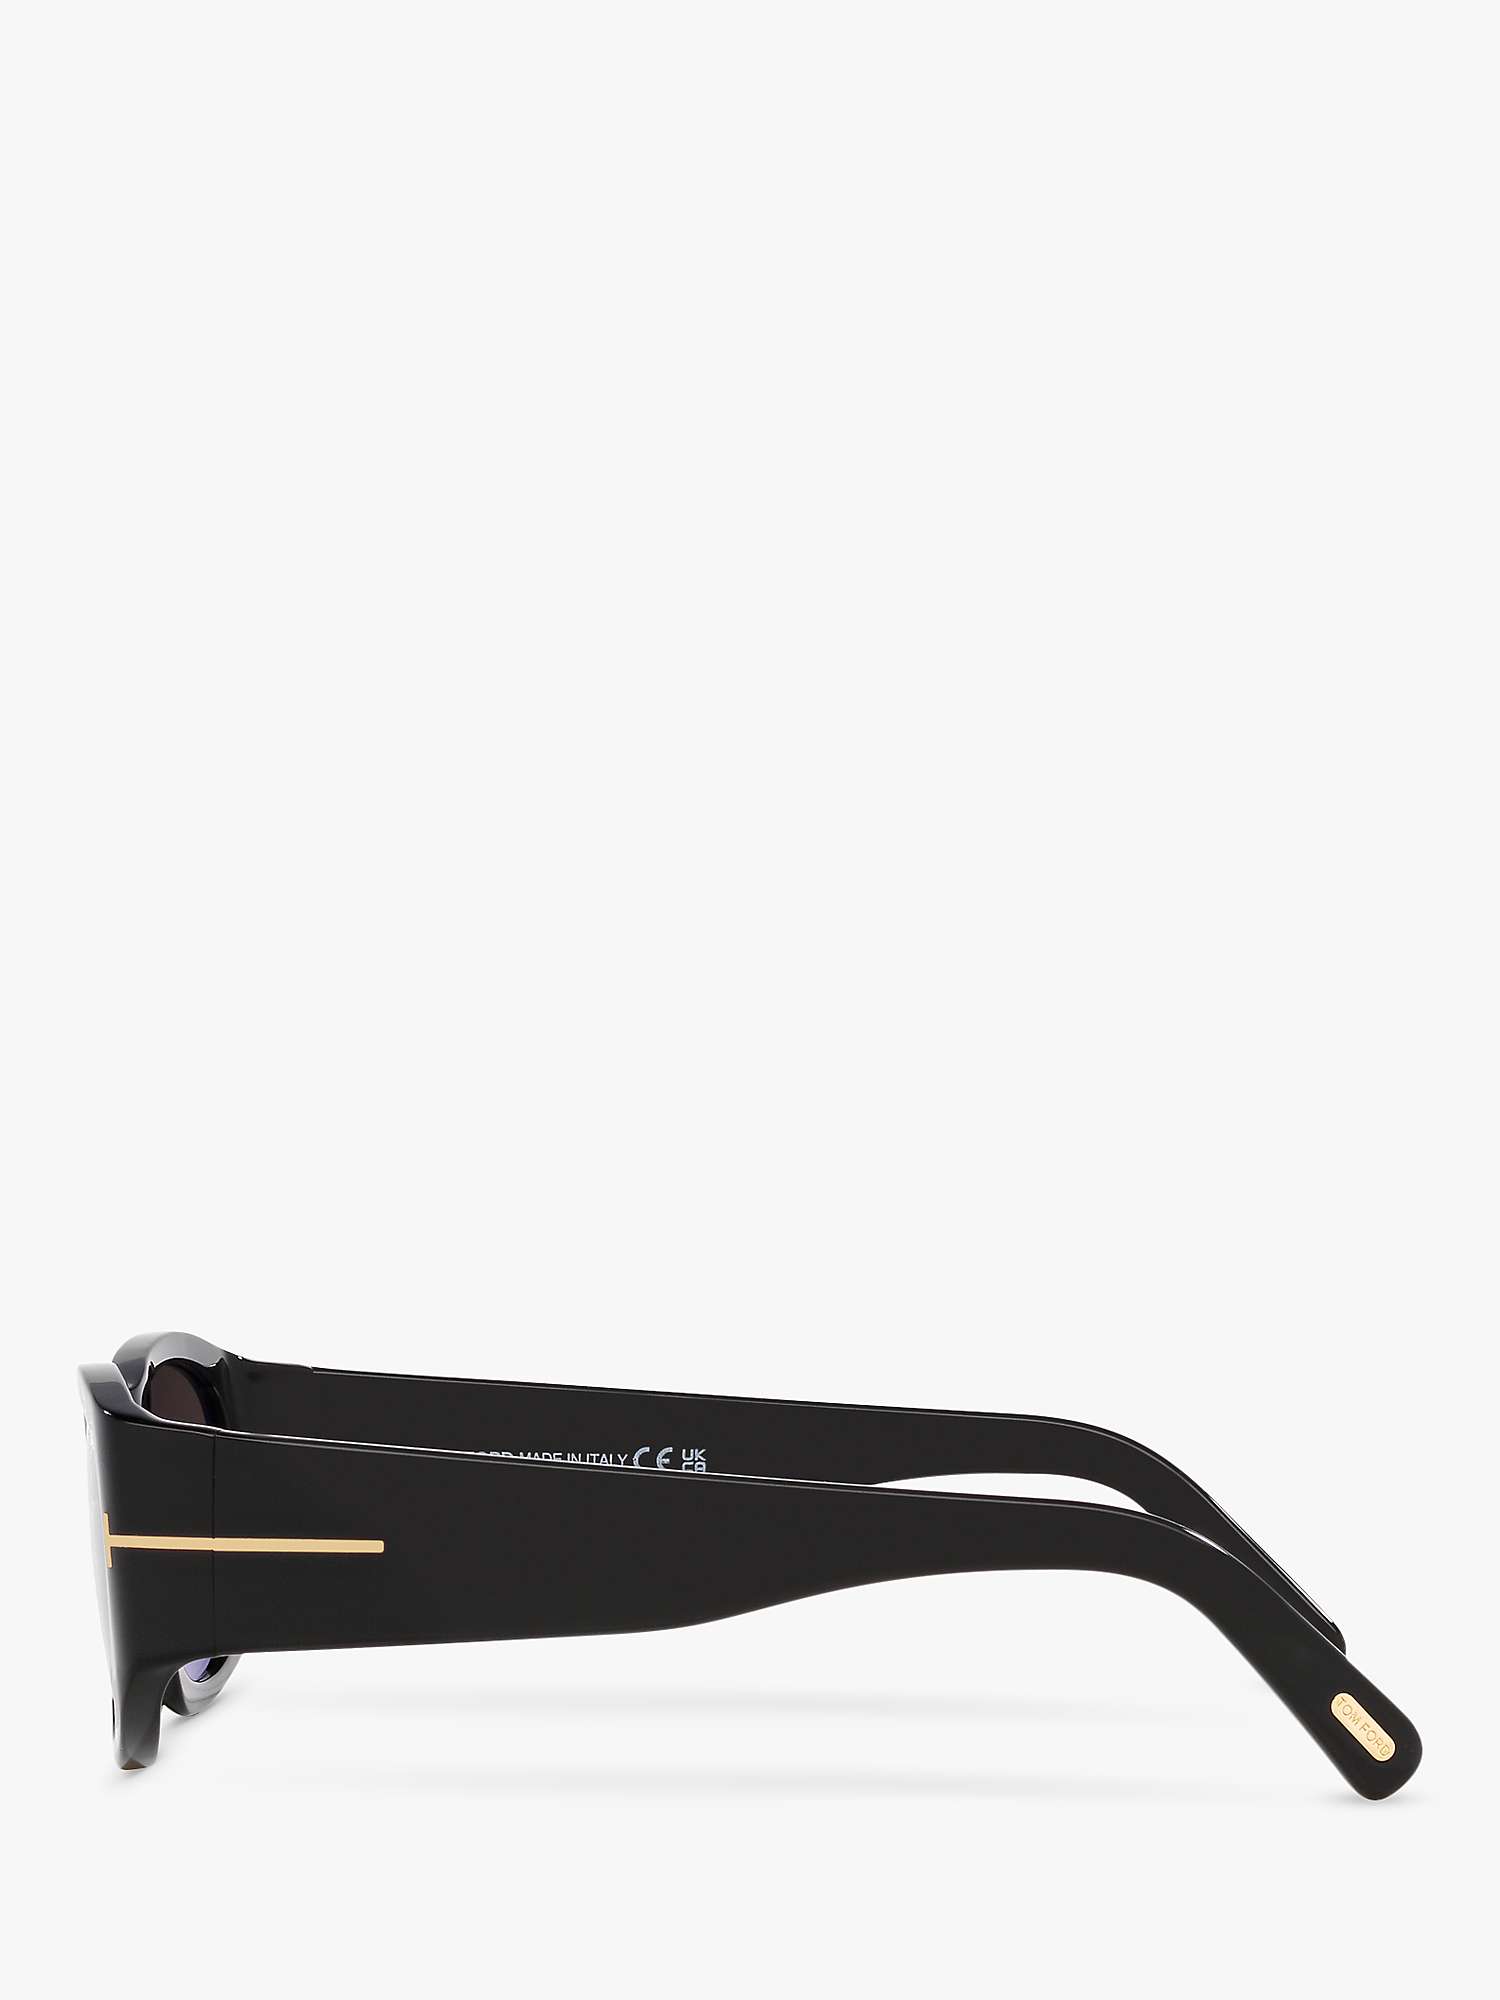 Buy TOM FORD FT0987 Unisex Cyrille Square Sunglasses Online at johnlewis.com